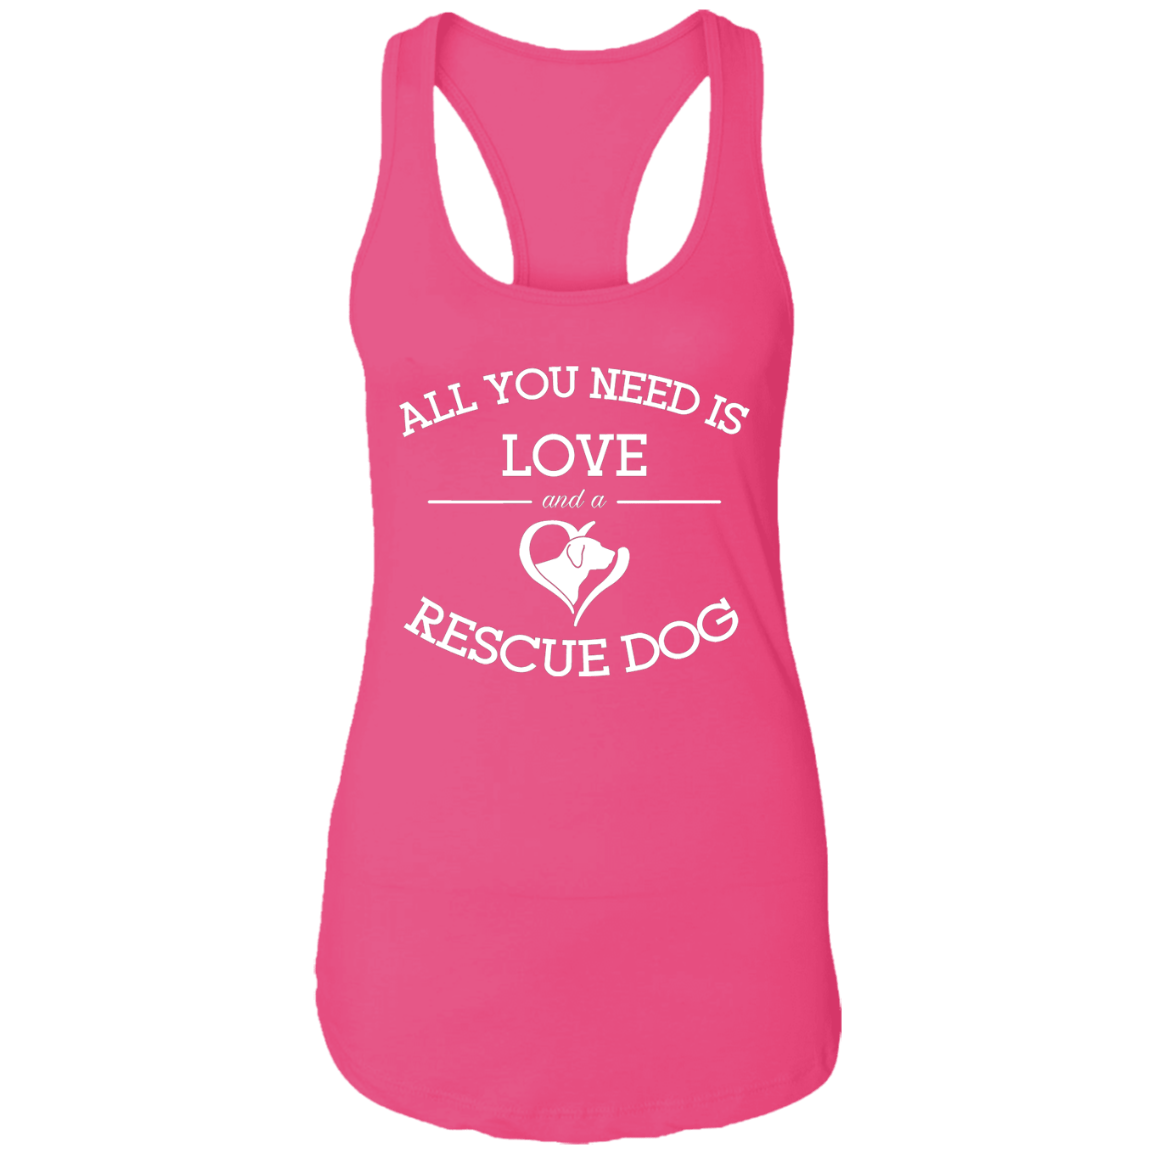 Love And A Rescue Dog - Ladies Racer Back Tank.